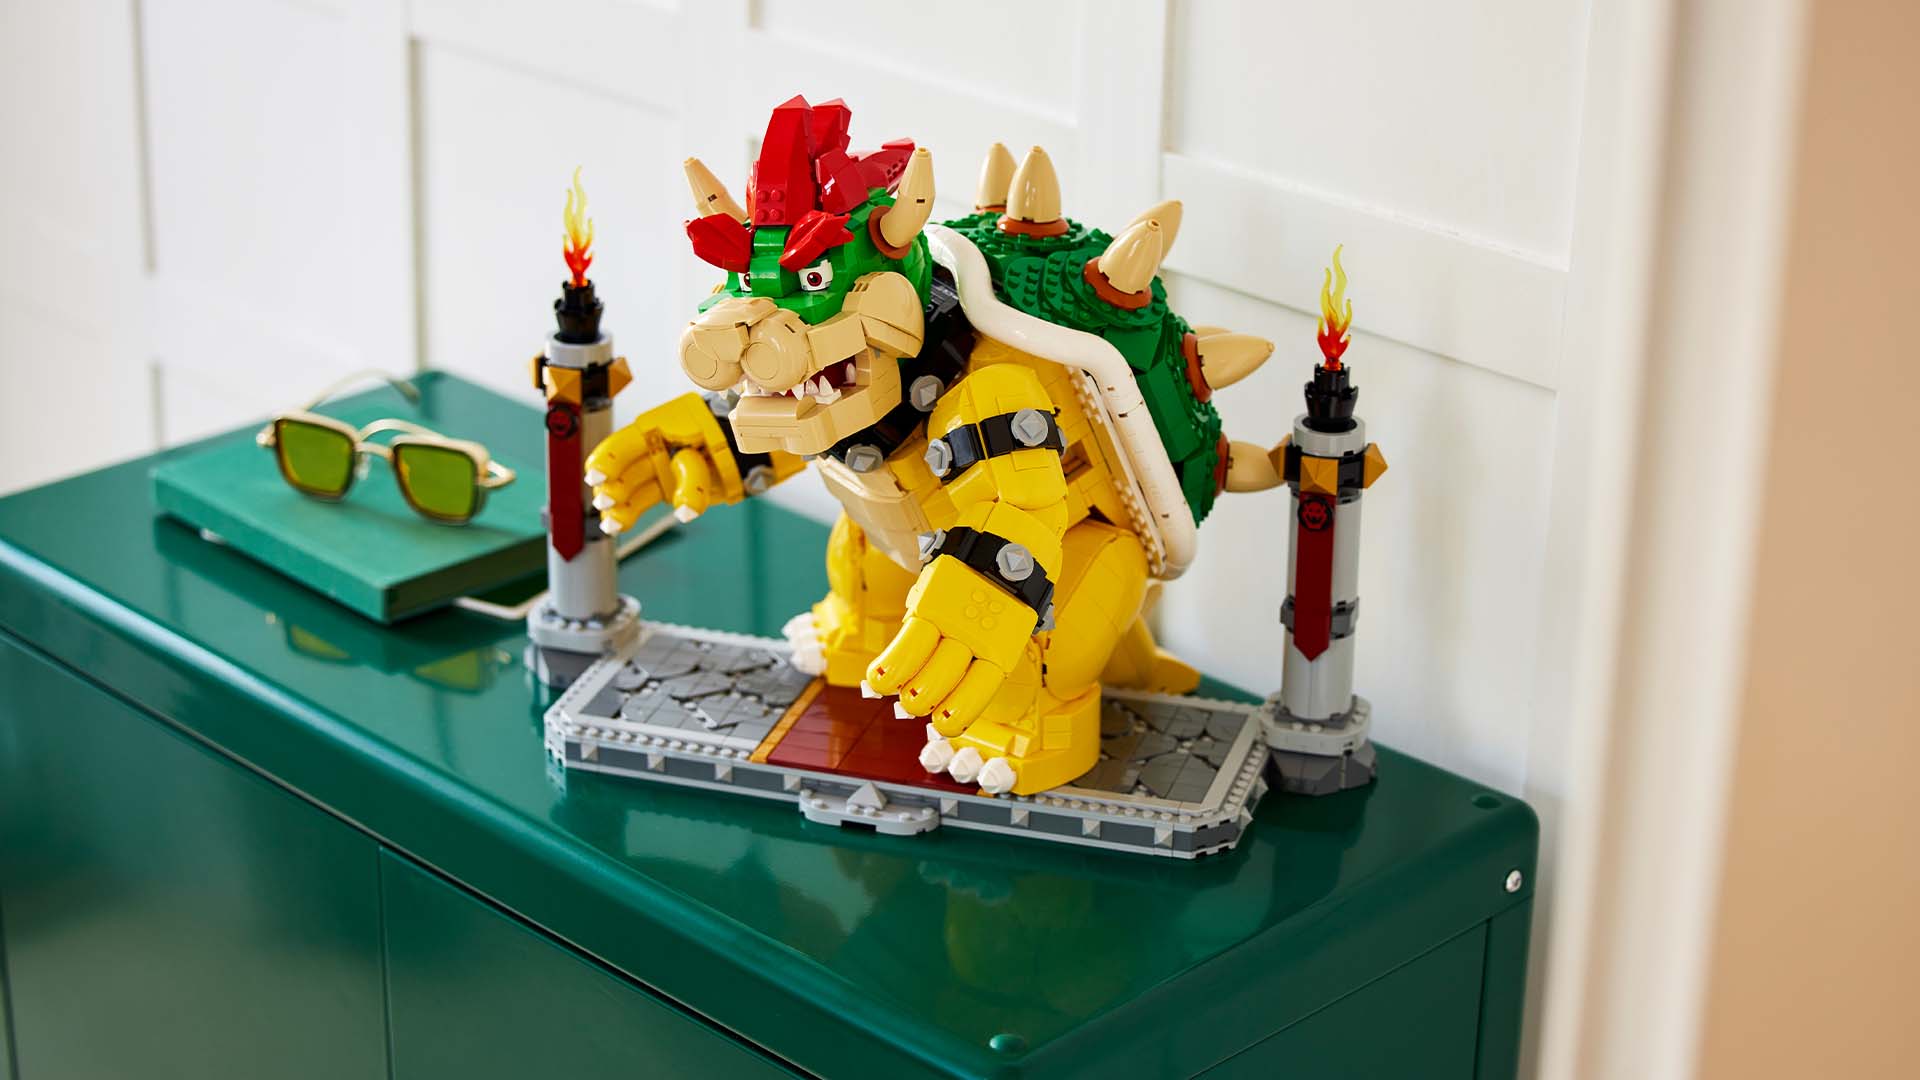 did you know about this LEGO bowser easter egg? #lego #legos